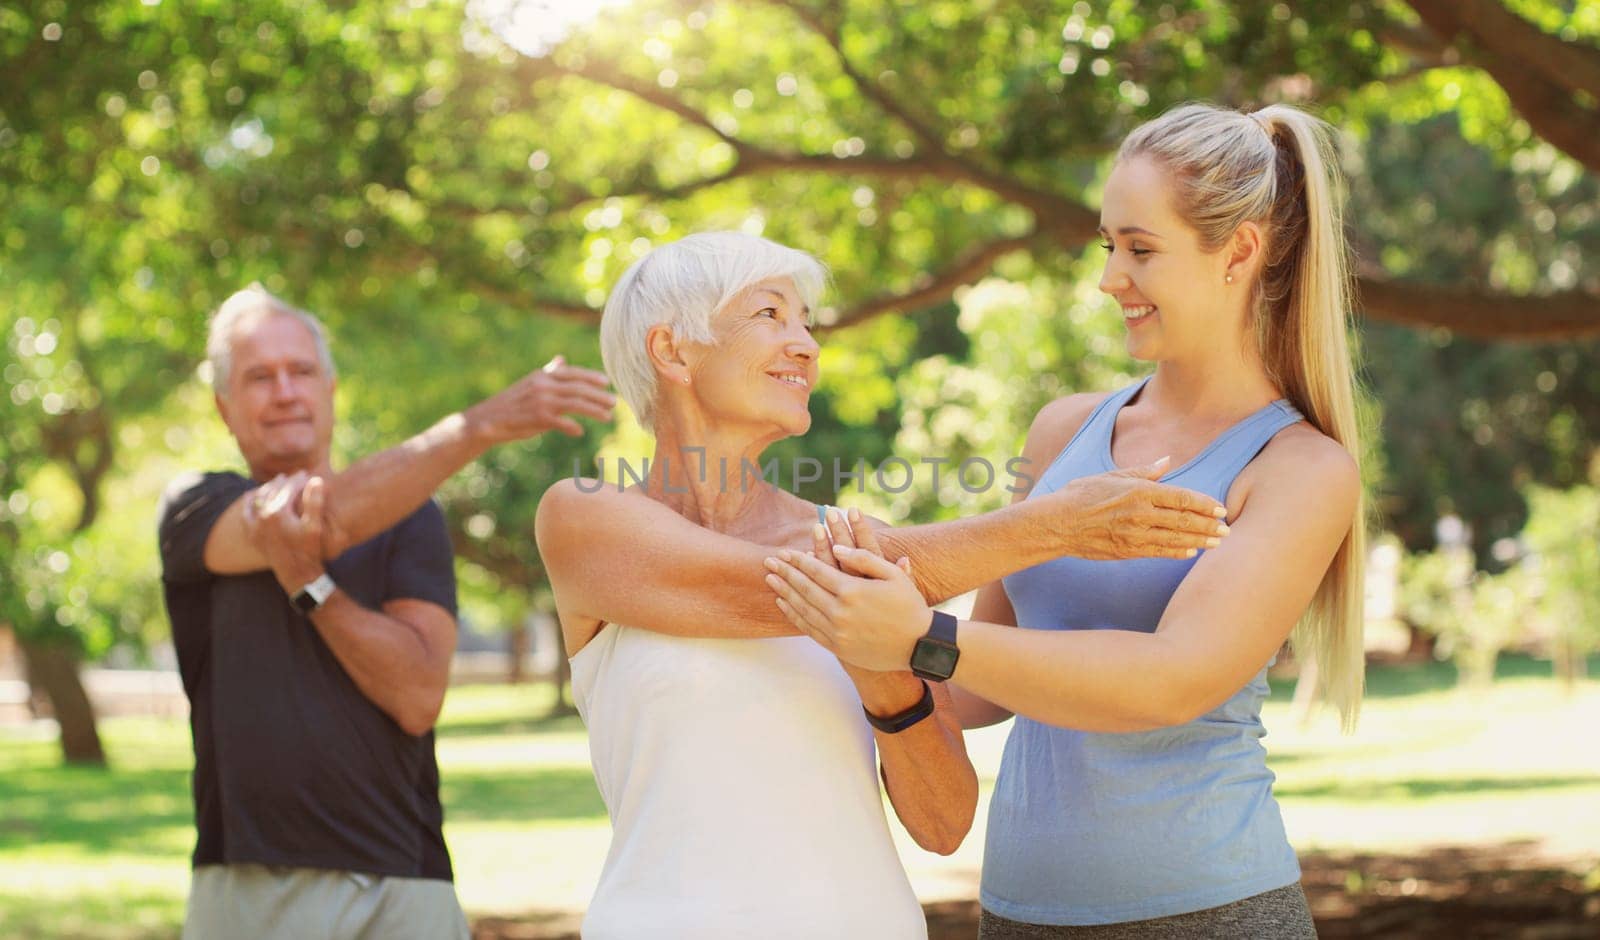 Yoga, workout and an old couple with their personal trainer in a park for a health or active lifestyle. Exercise, wellness or zen and senior people outdoor for fitness class with their pilates coach.